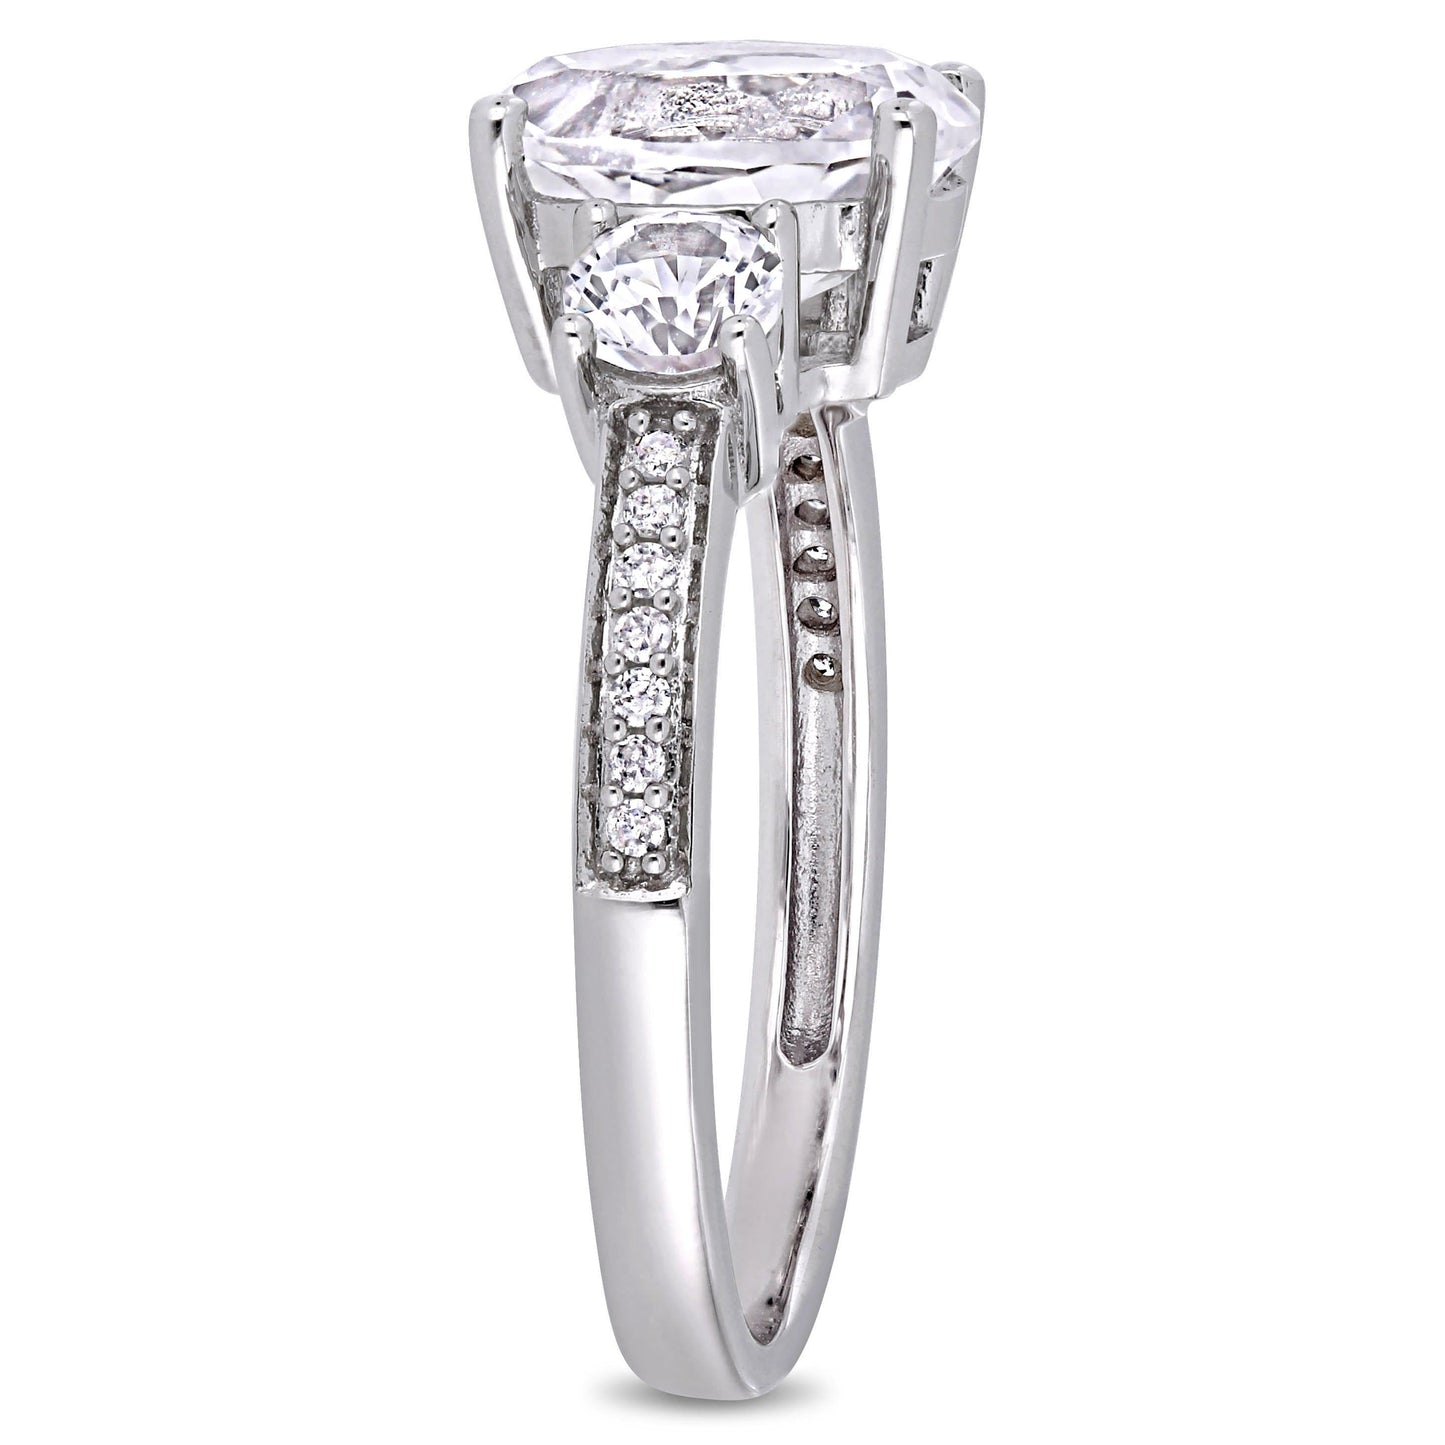 Julie Leah 3-Stone Oval White Sapphire & Diamond Ring in 10k White Gold